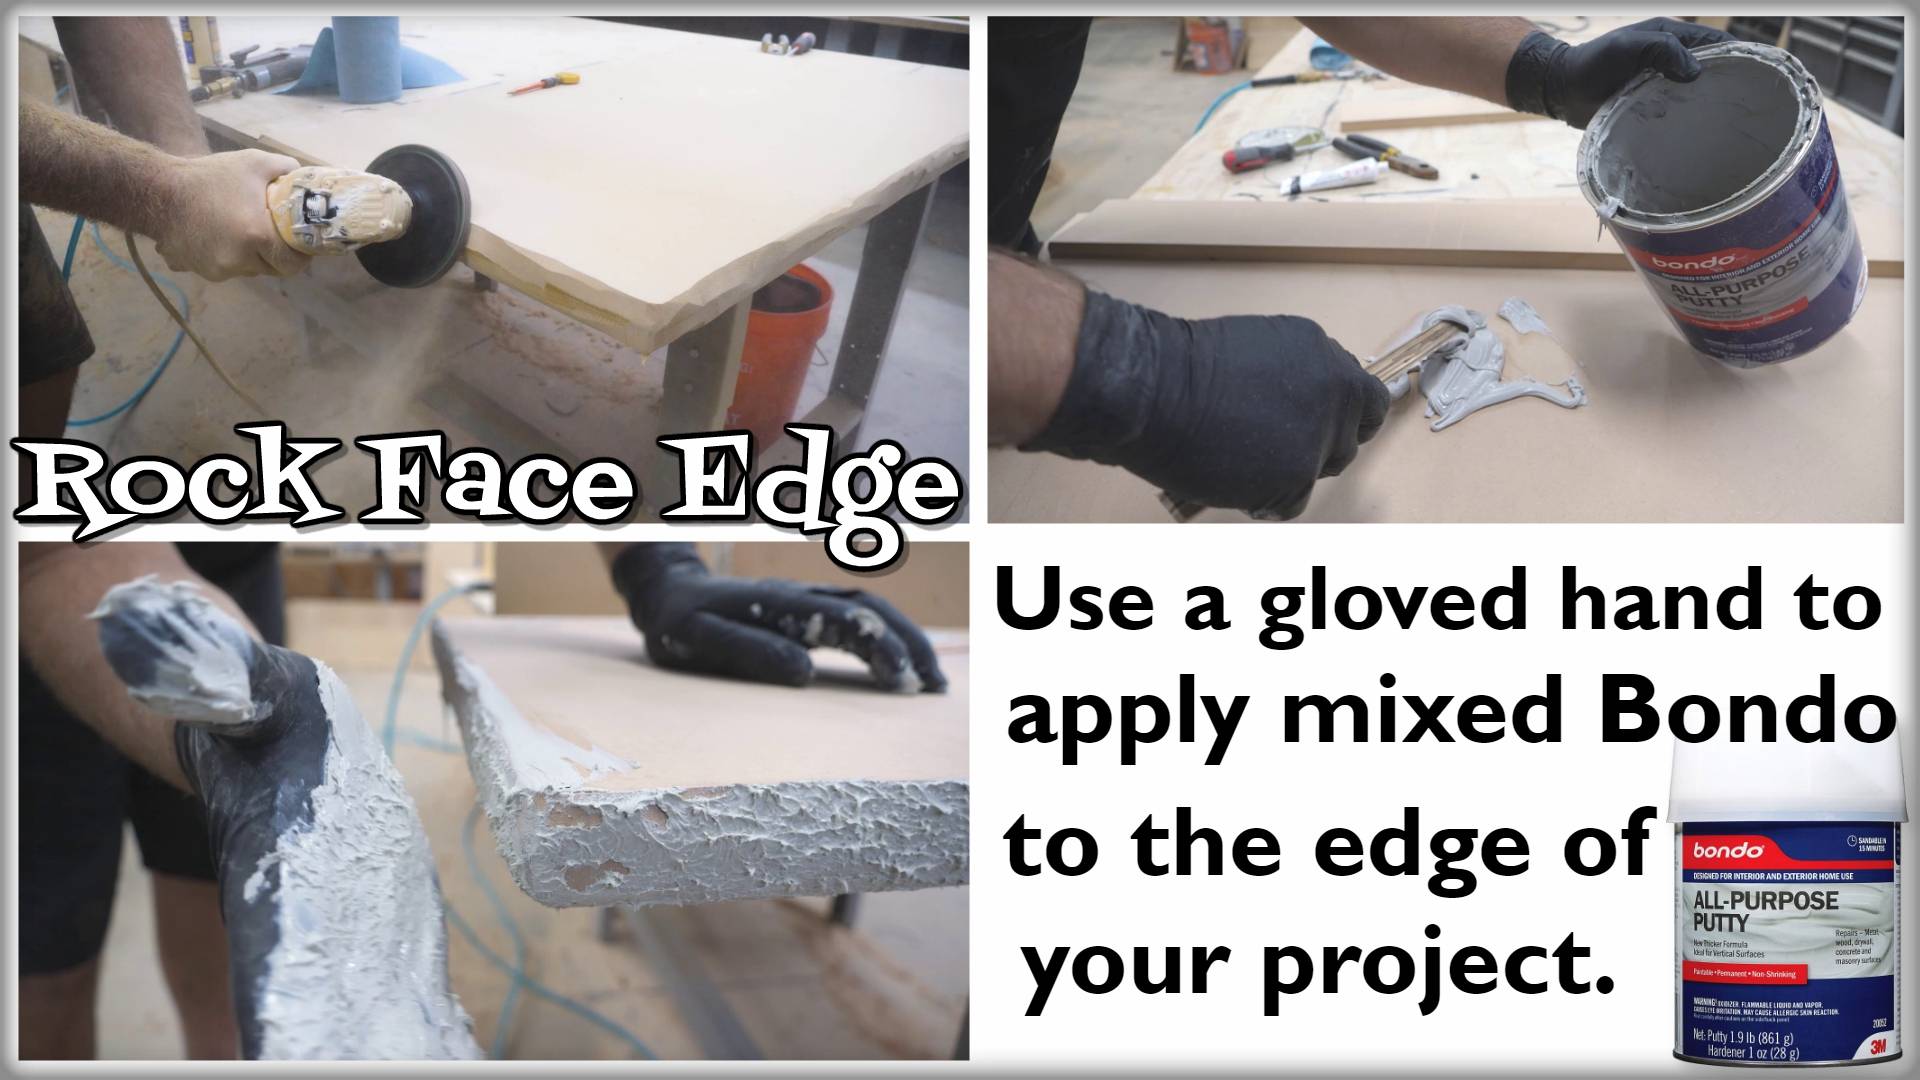 Rock face Edge: Use a gloved hand to apply mixed Bondo to the edge of your project.